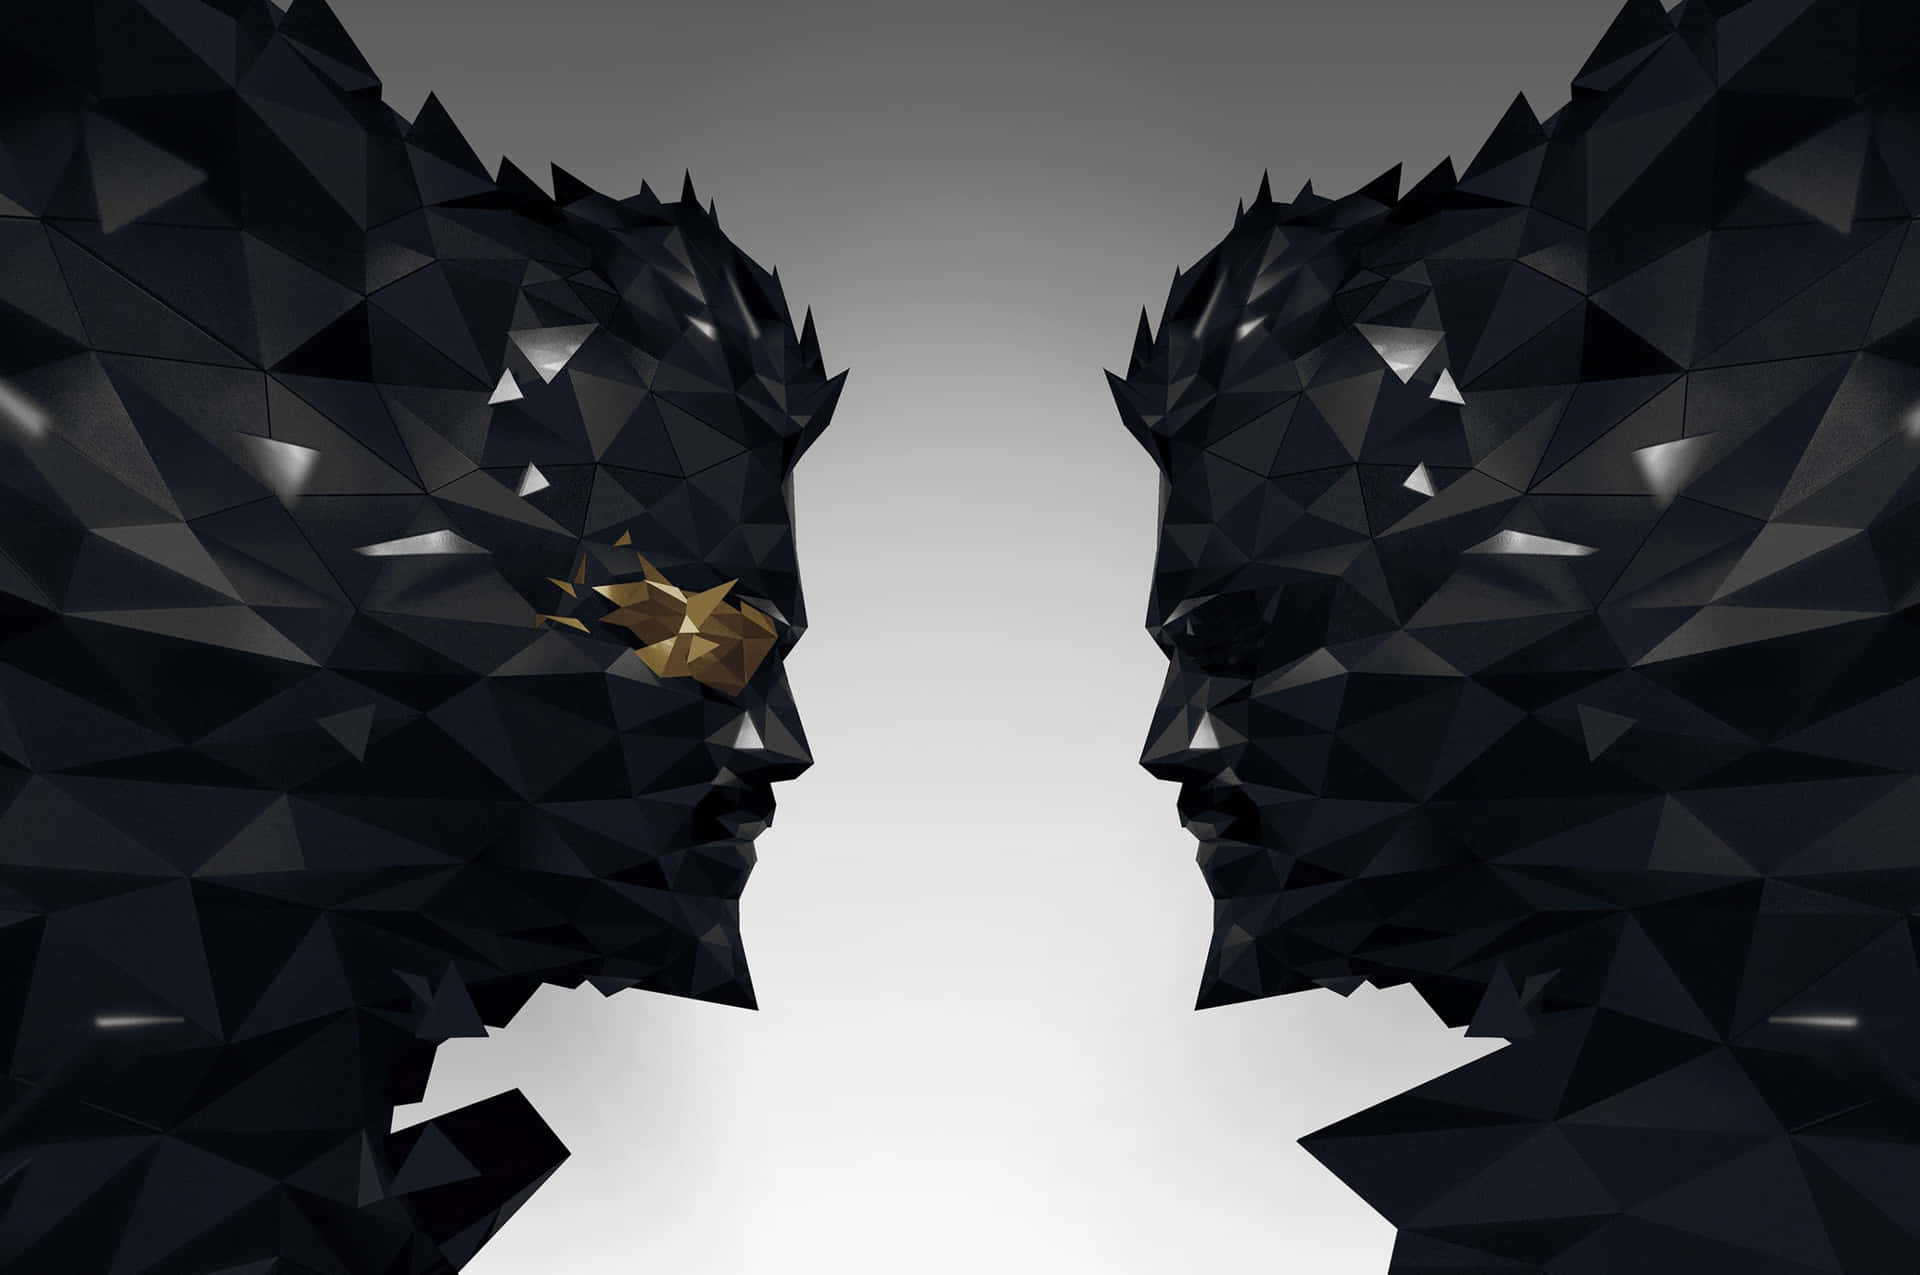 A Black And White Image Of Two Faces With Gold Heads Wallpaper